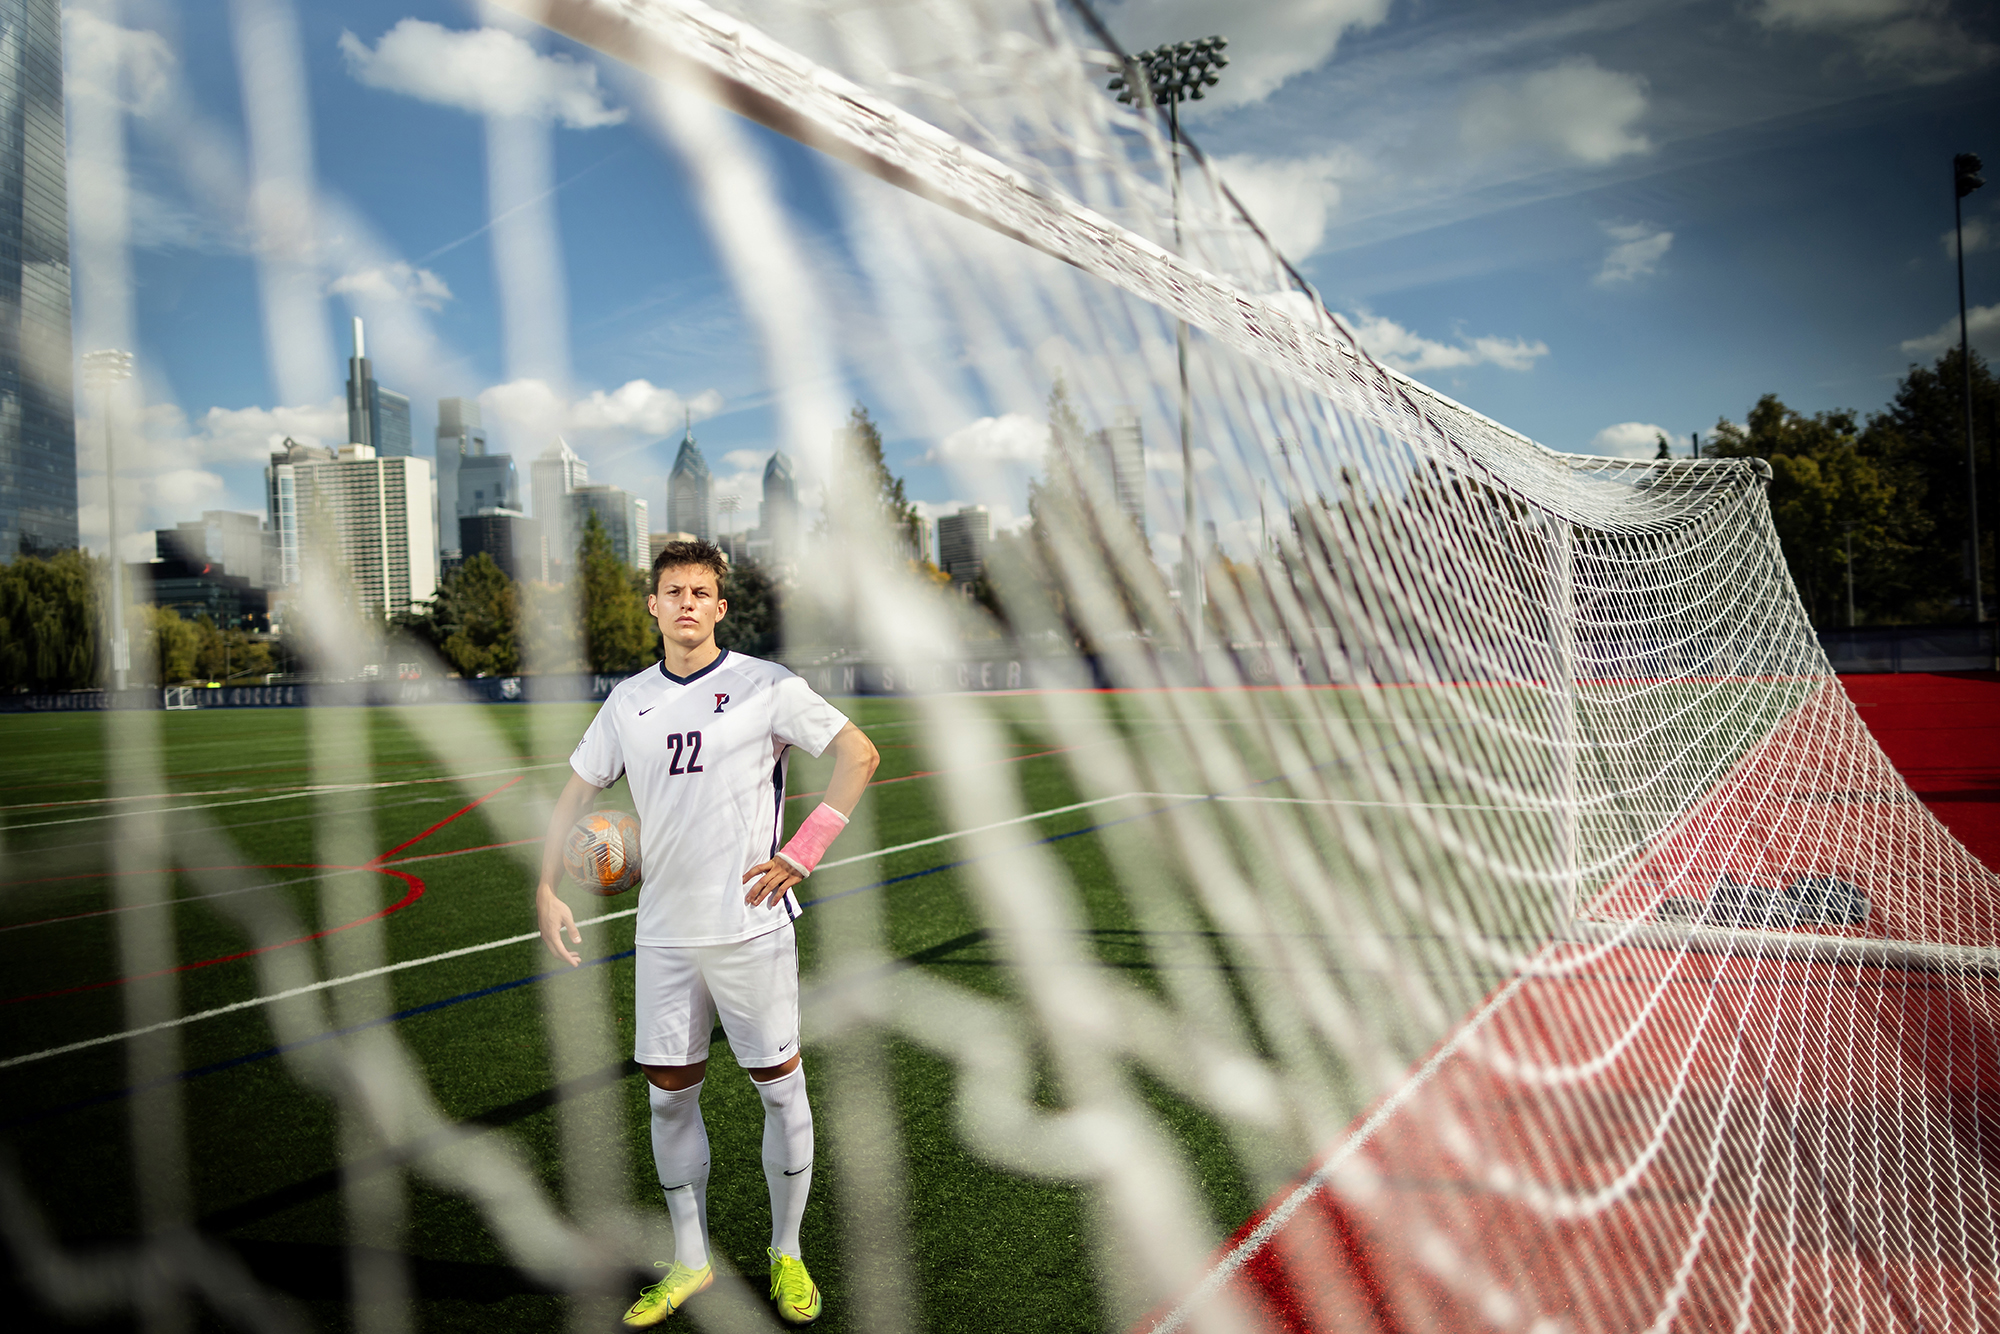 Stas Korzeniowski stands on the field at Penn Park with a soccer ball on his right side, with the Philly skyline in the background.